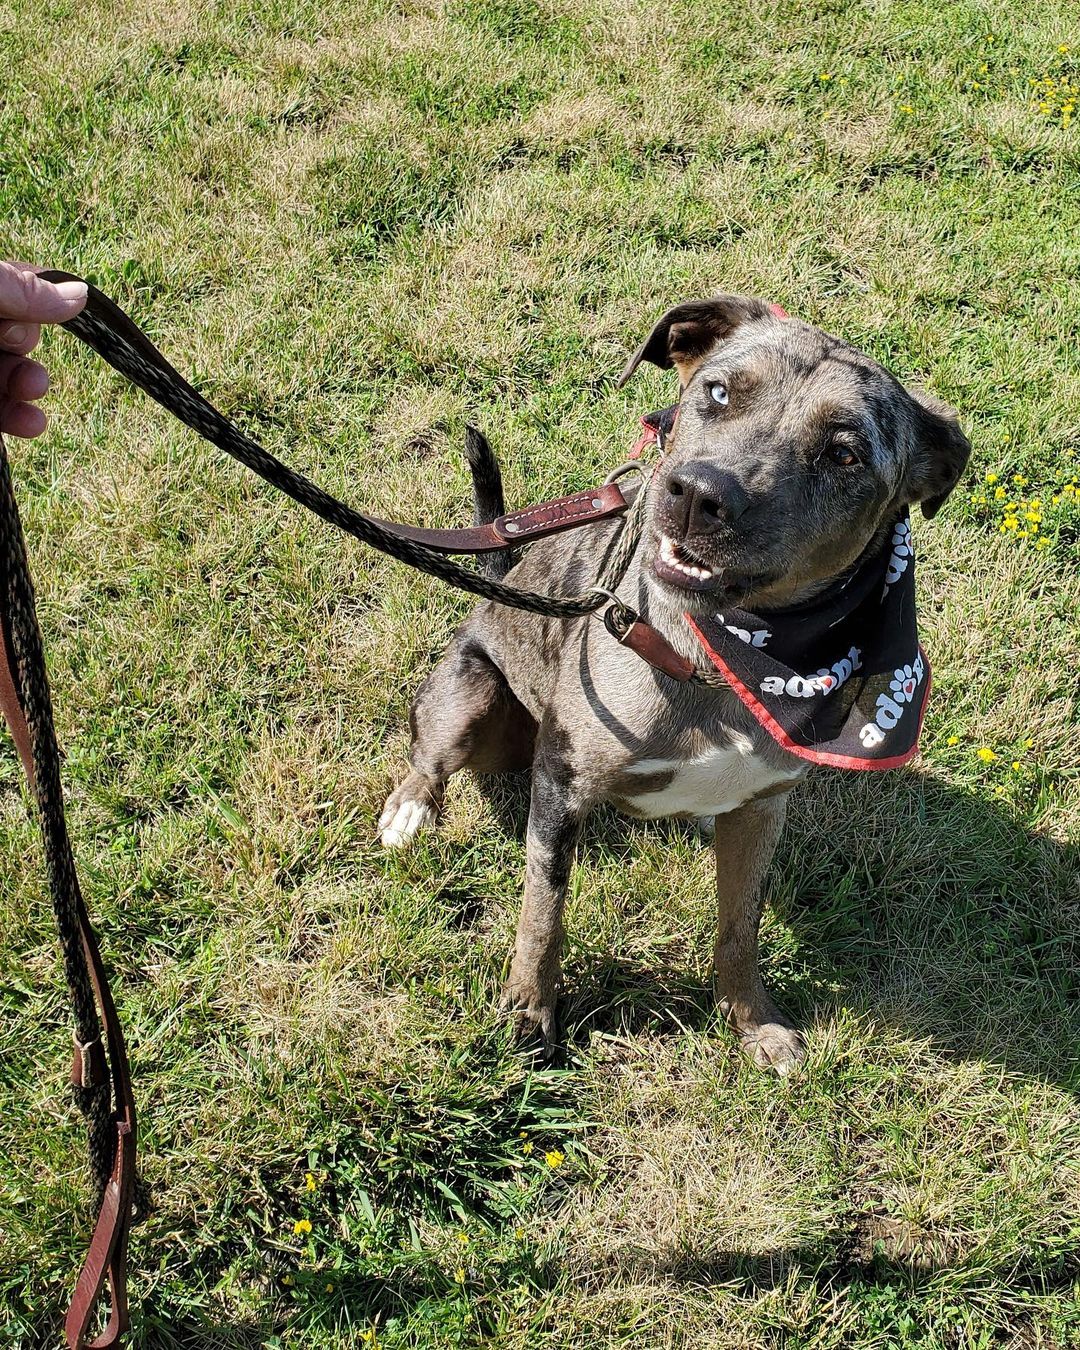 Male Catahoula X possible lab mix in Plattsburgh NY. Up for adoption to a screened approved home. Application on line at www.jcldr.com.  Here is the petfinder link, read more about this fine male dog he is in his prime at 4 years old. Can contact Janeen jj4@midrivers.com but please put in an app first off website. Good place to get a jump start. Then we call you and visit or you can email and then call me. Looking for a forever home for this boy with solid commitment and we will support and stand by you if we are needed.